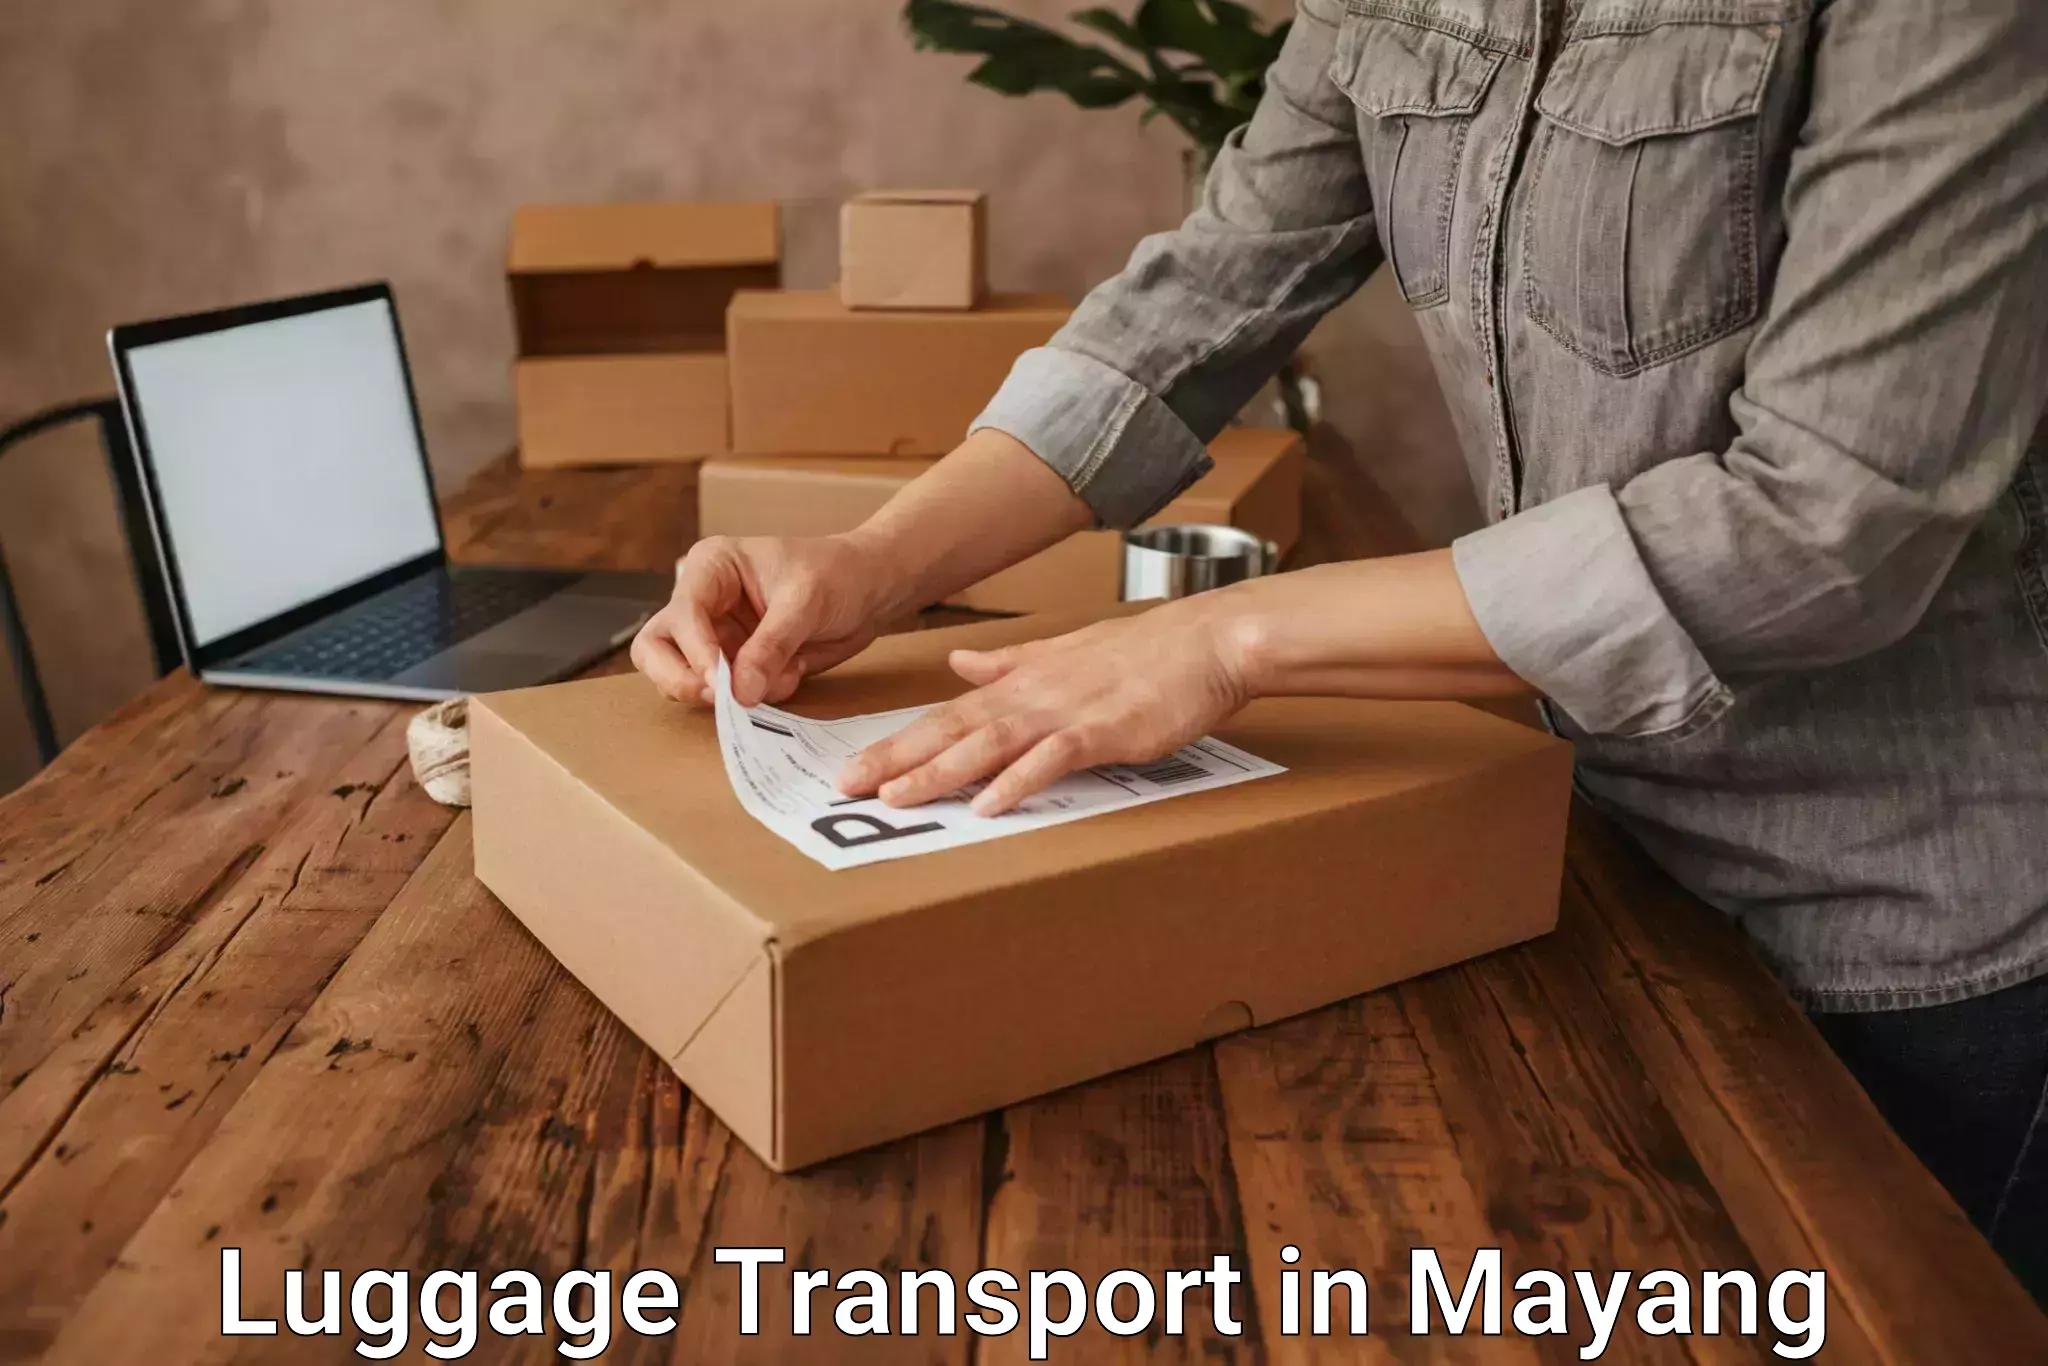 Luggage transport logistics in Mayang